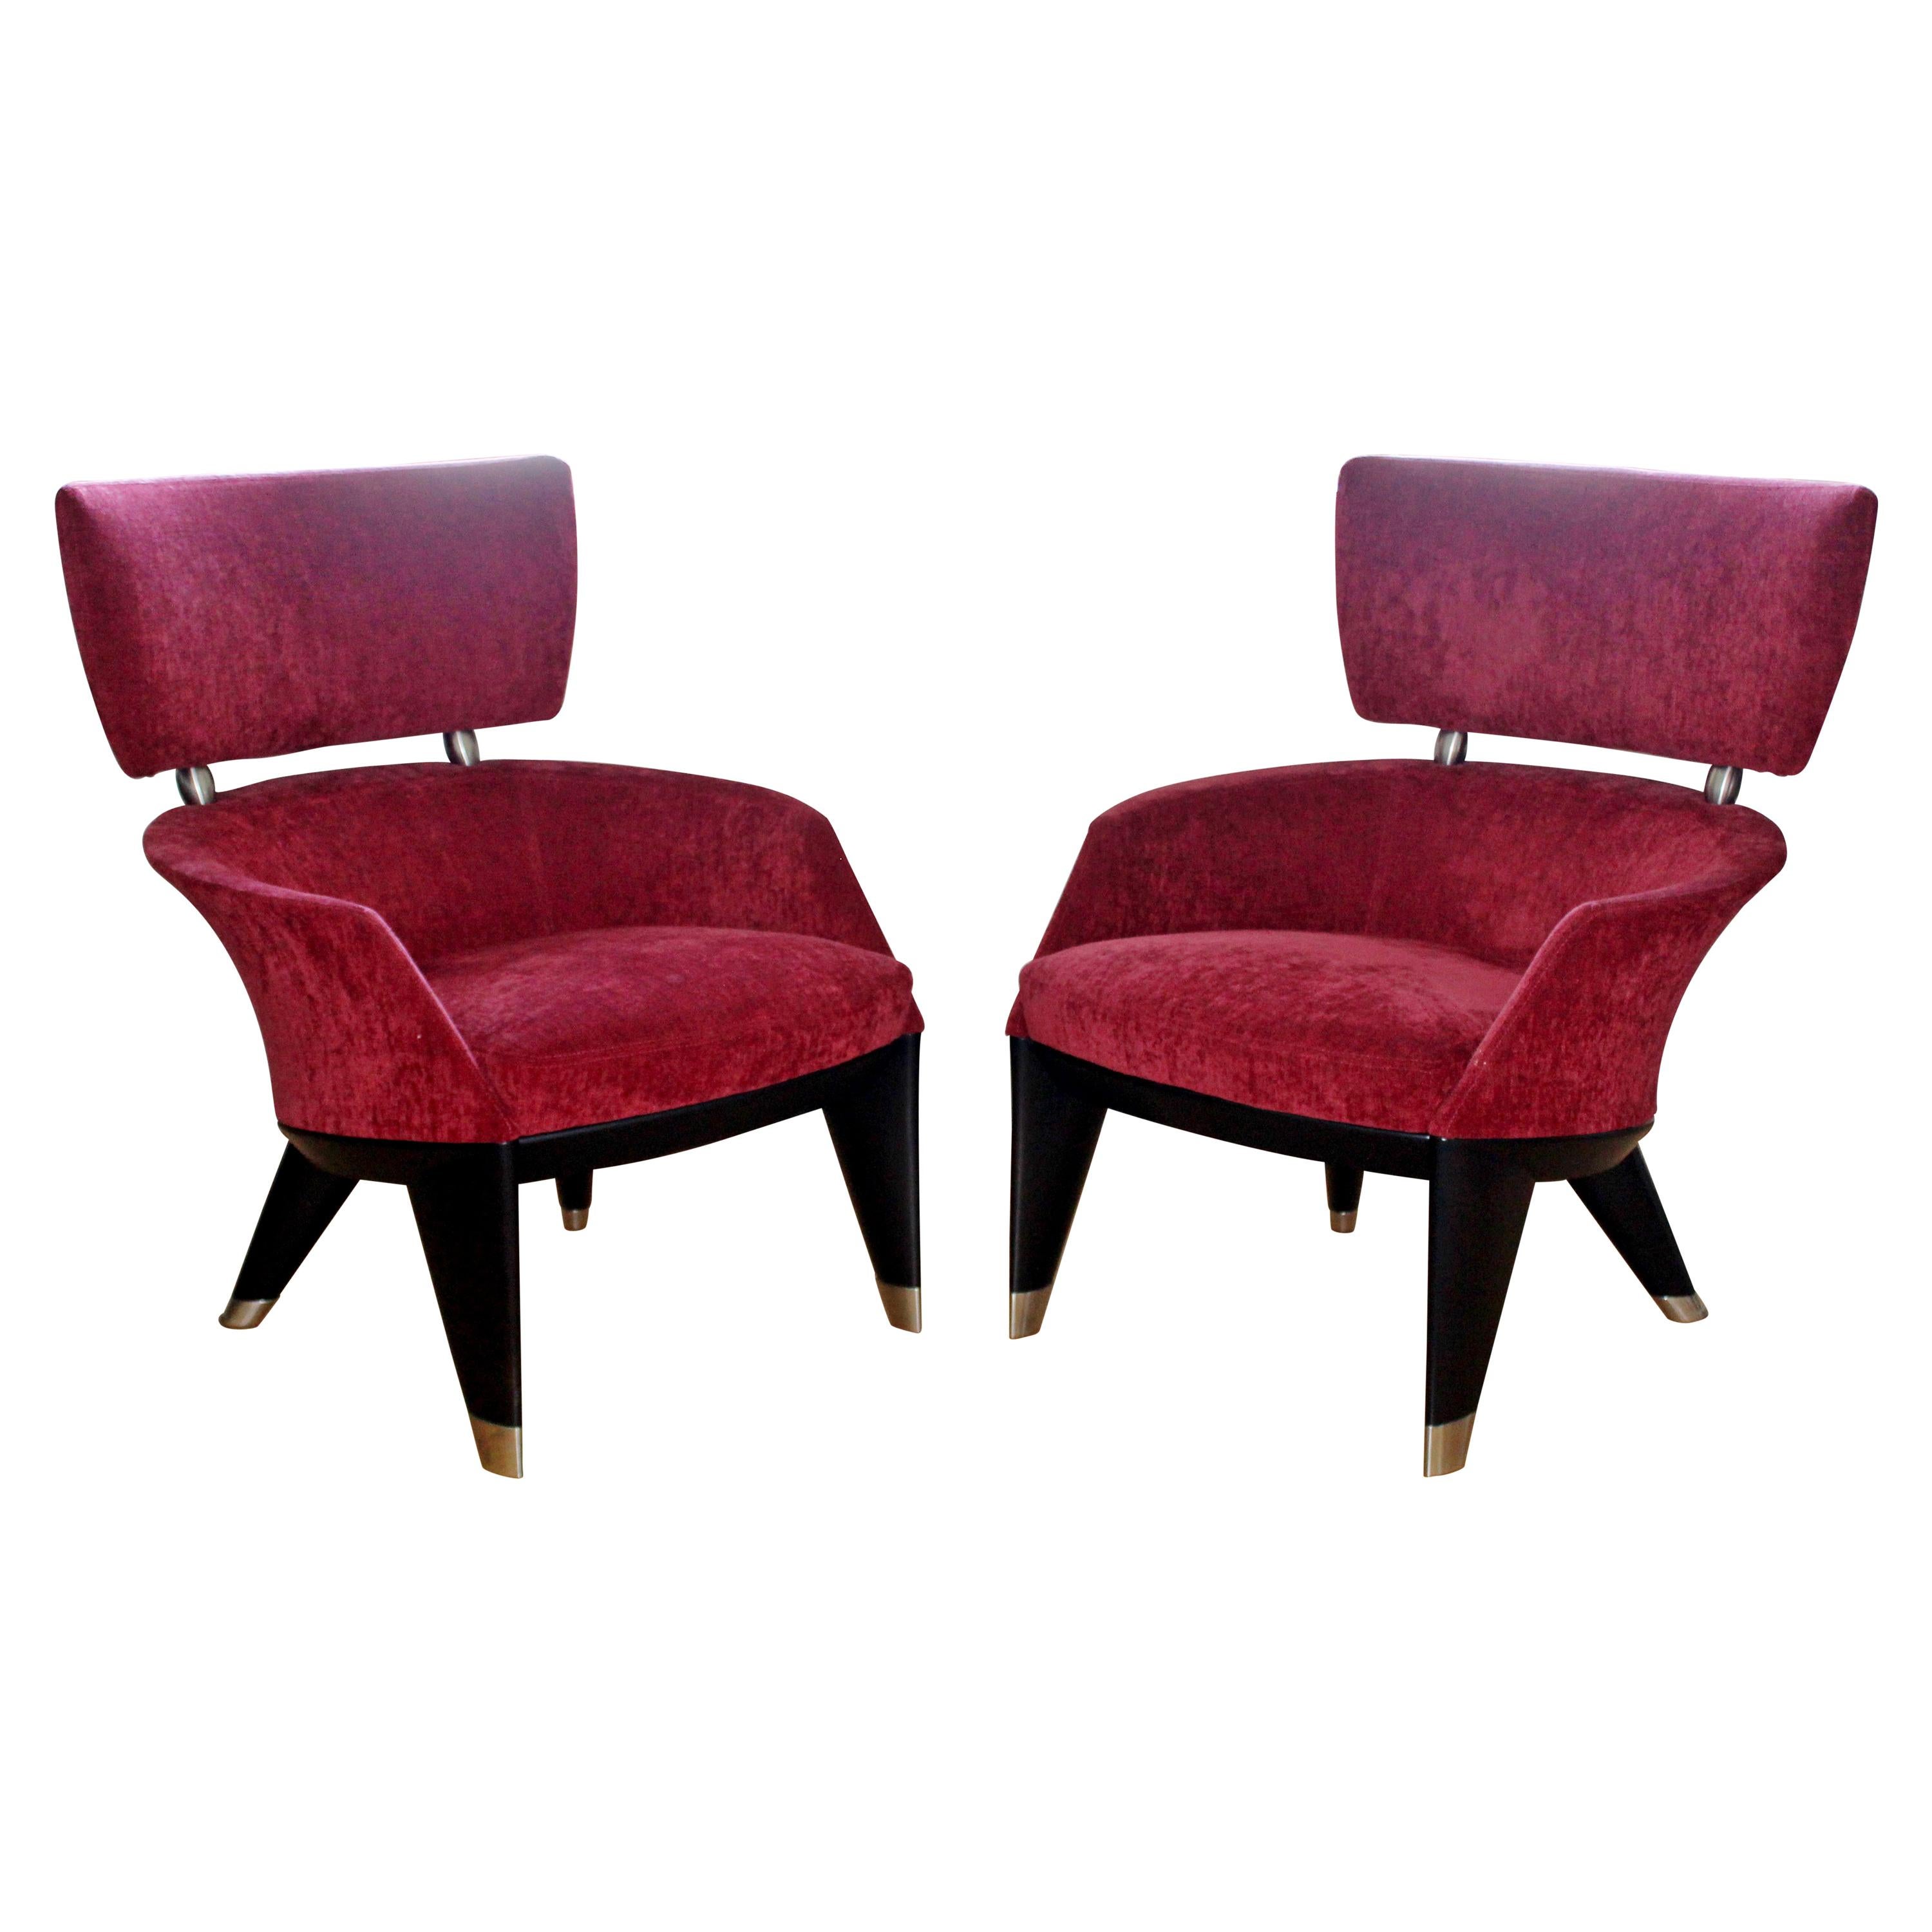 Contemporary Modern Pair of Leon Krier for Giorgetti Armchairs 1990s Italy Red